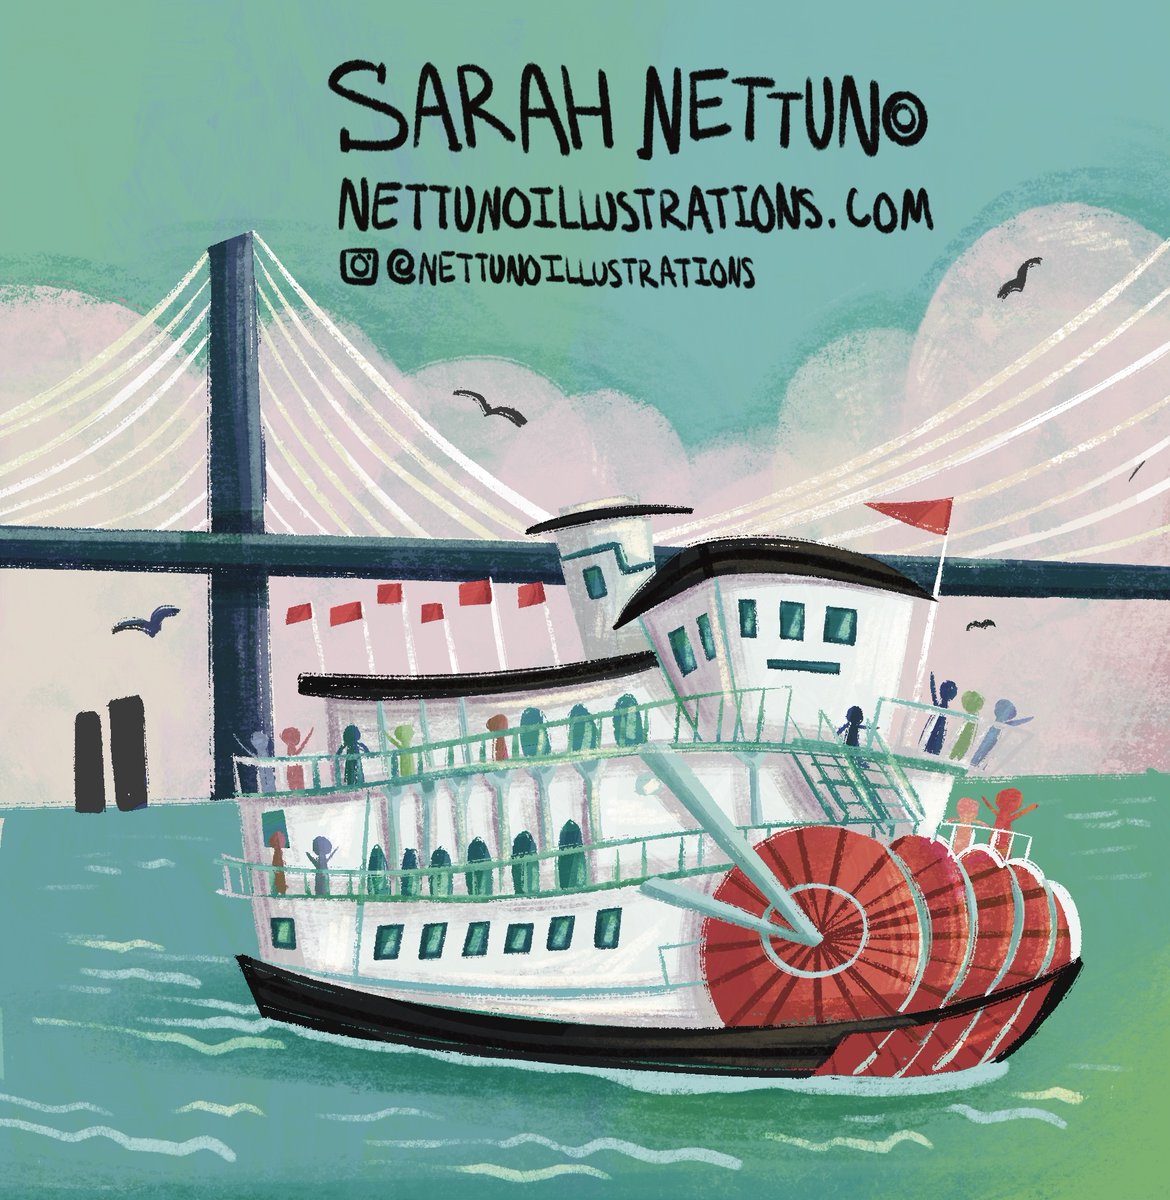 Hello agents, art directors, and editors, it’s #kidlitartpostcard day! My name is Sarah Nettuno and I am a published illustrator and upcoming author  seeking representation. This illustration is from a recently finished board book with #ArcadiaPublishing #kidlitart #KidLitPit